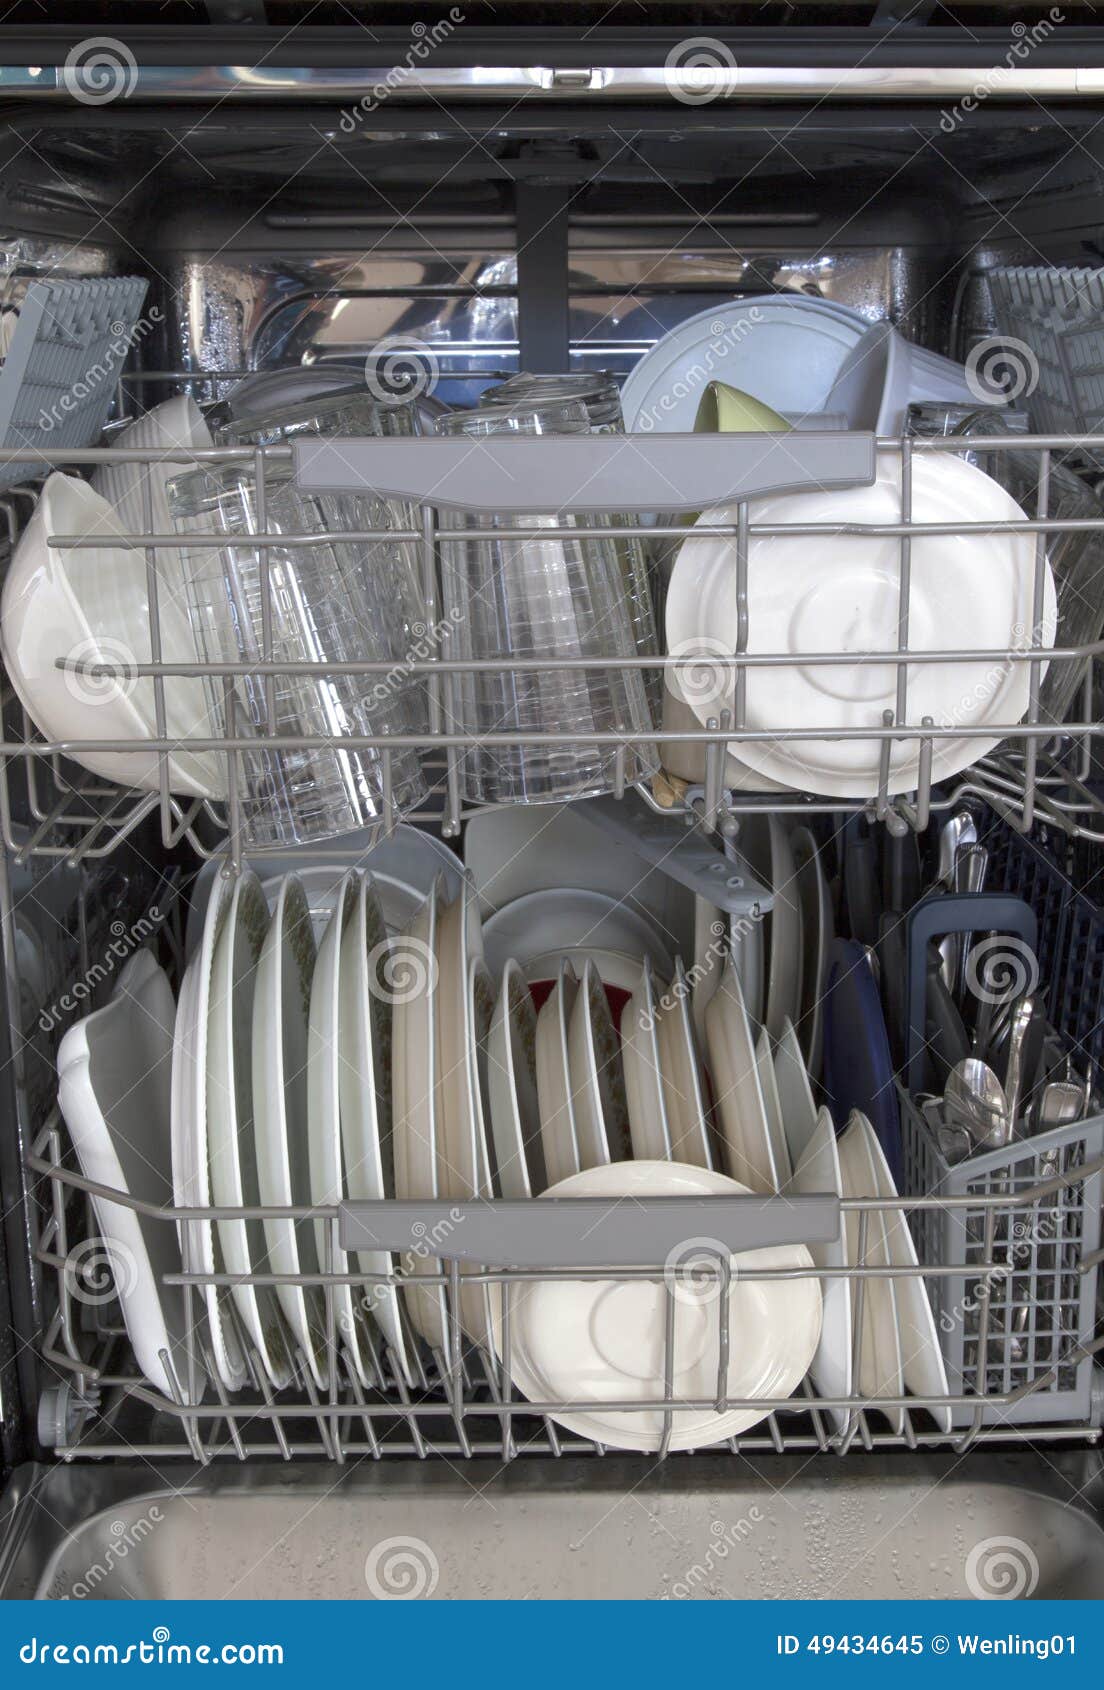 cleaned dishware in dishwasher background